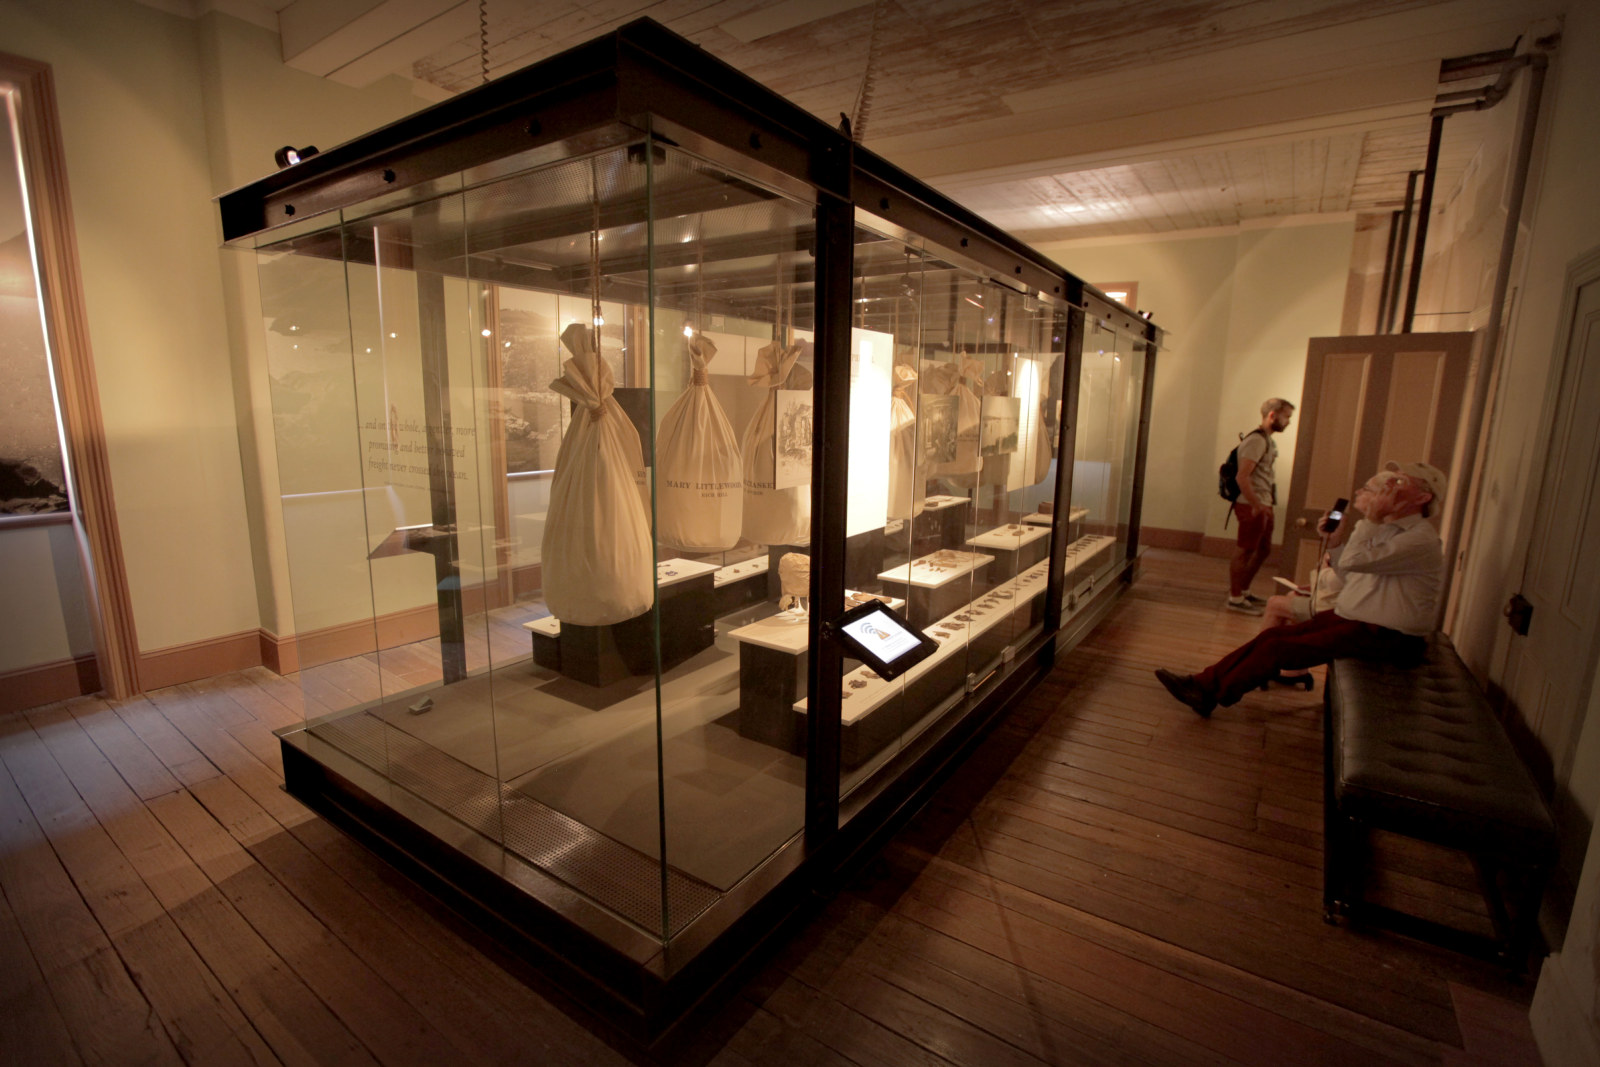 Image of a large glass showcase that fills a room. Sacks can be seen hanging inside.